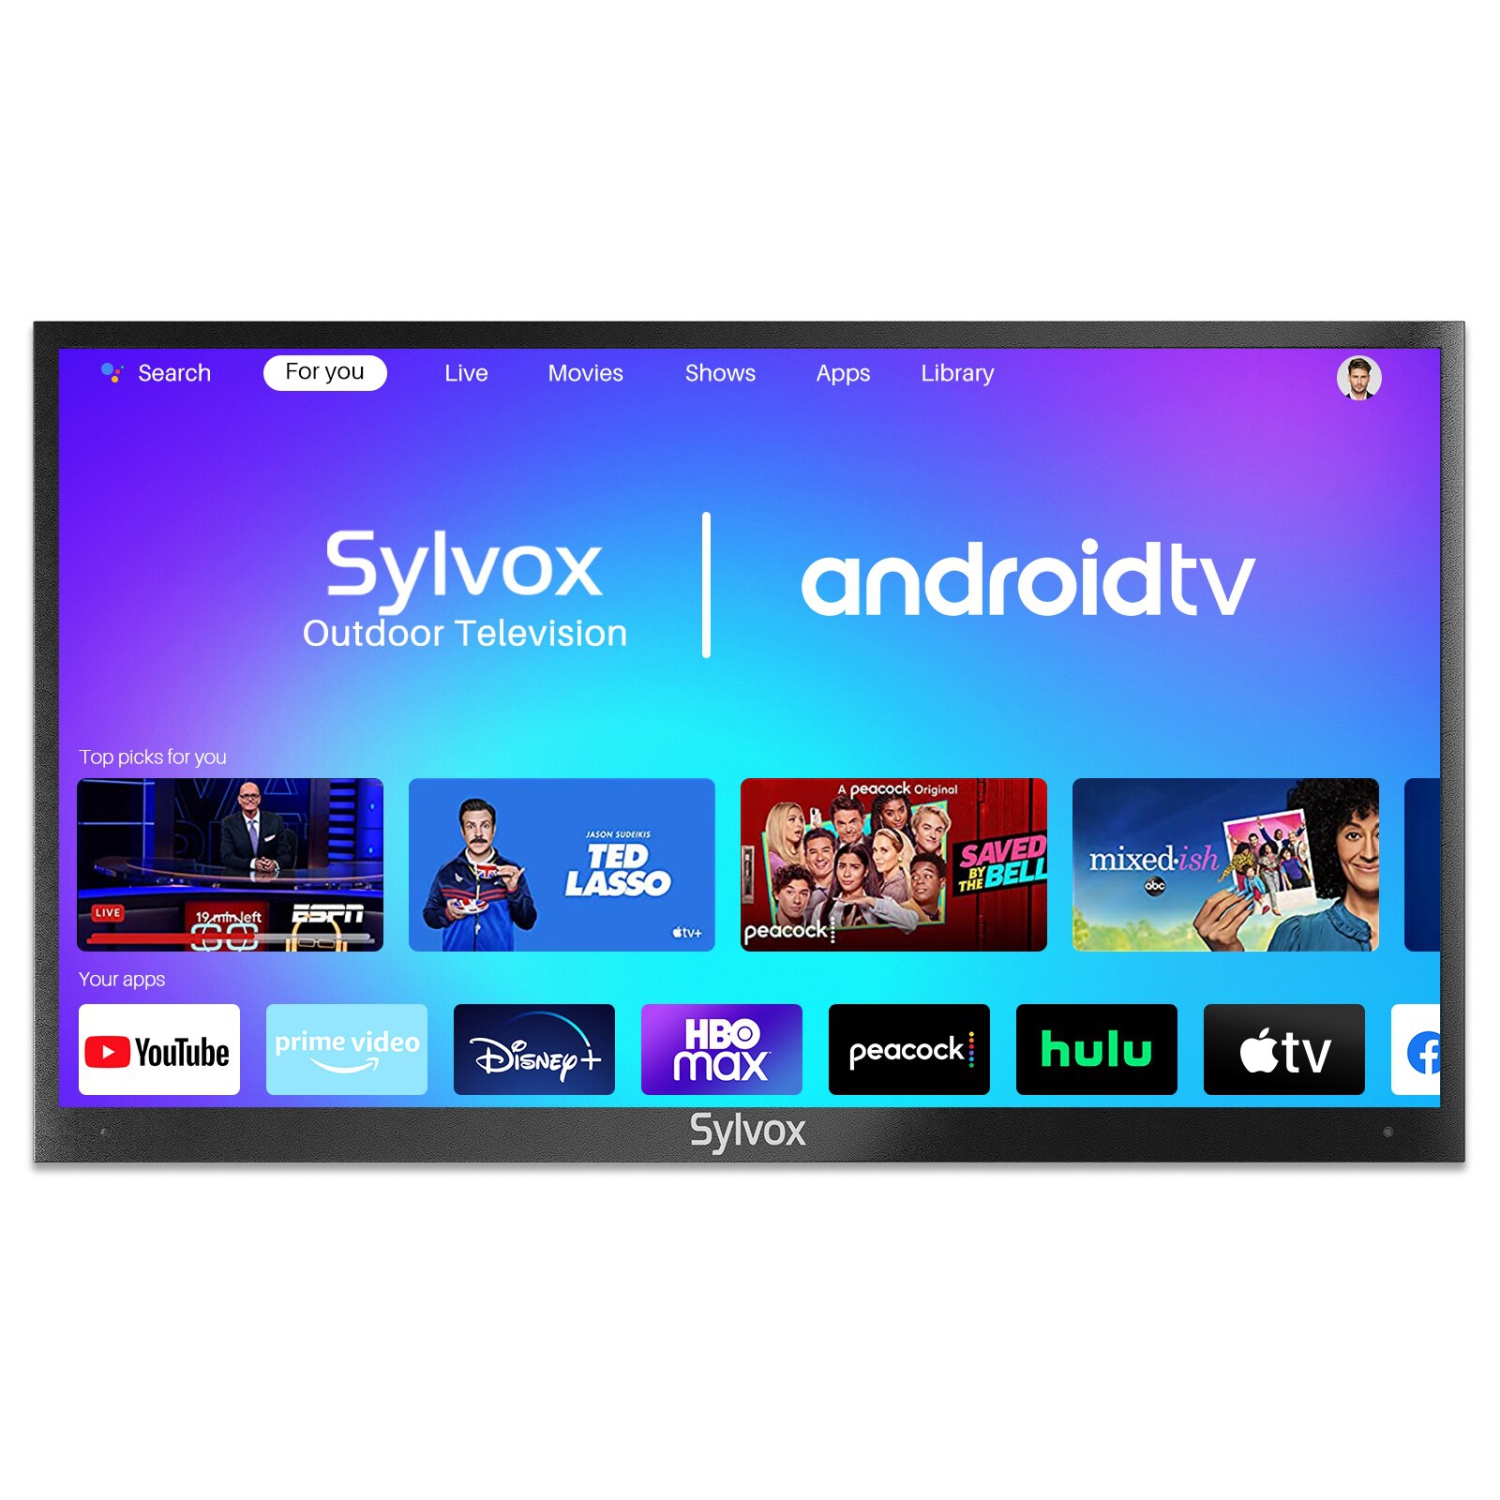 SYLVOX Outdoor TV Deck Pro Series 65" 4K UHD Smart TV with Voice Remote IP55 Waterproo Chromecast Built-in 60Hz Designed for Outdoors